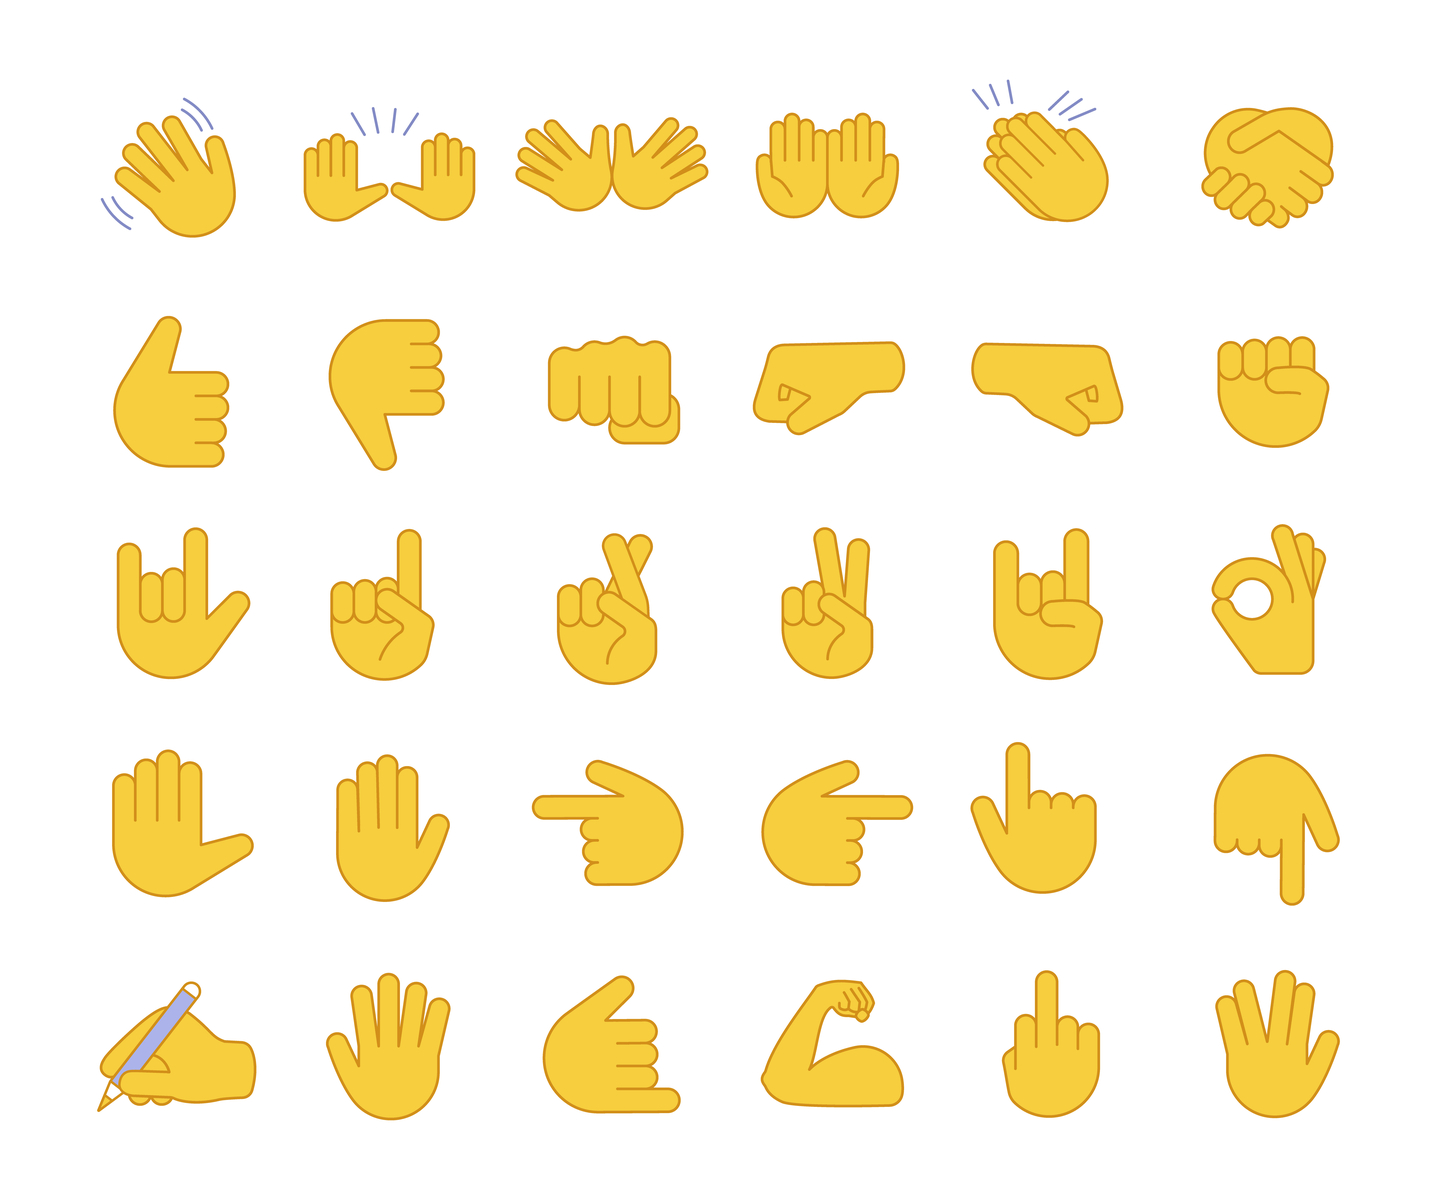 Hand Gesture Emojis Color Icons Set By Bsdgraphic On Dribbble